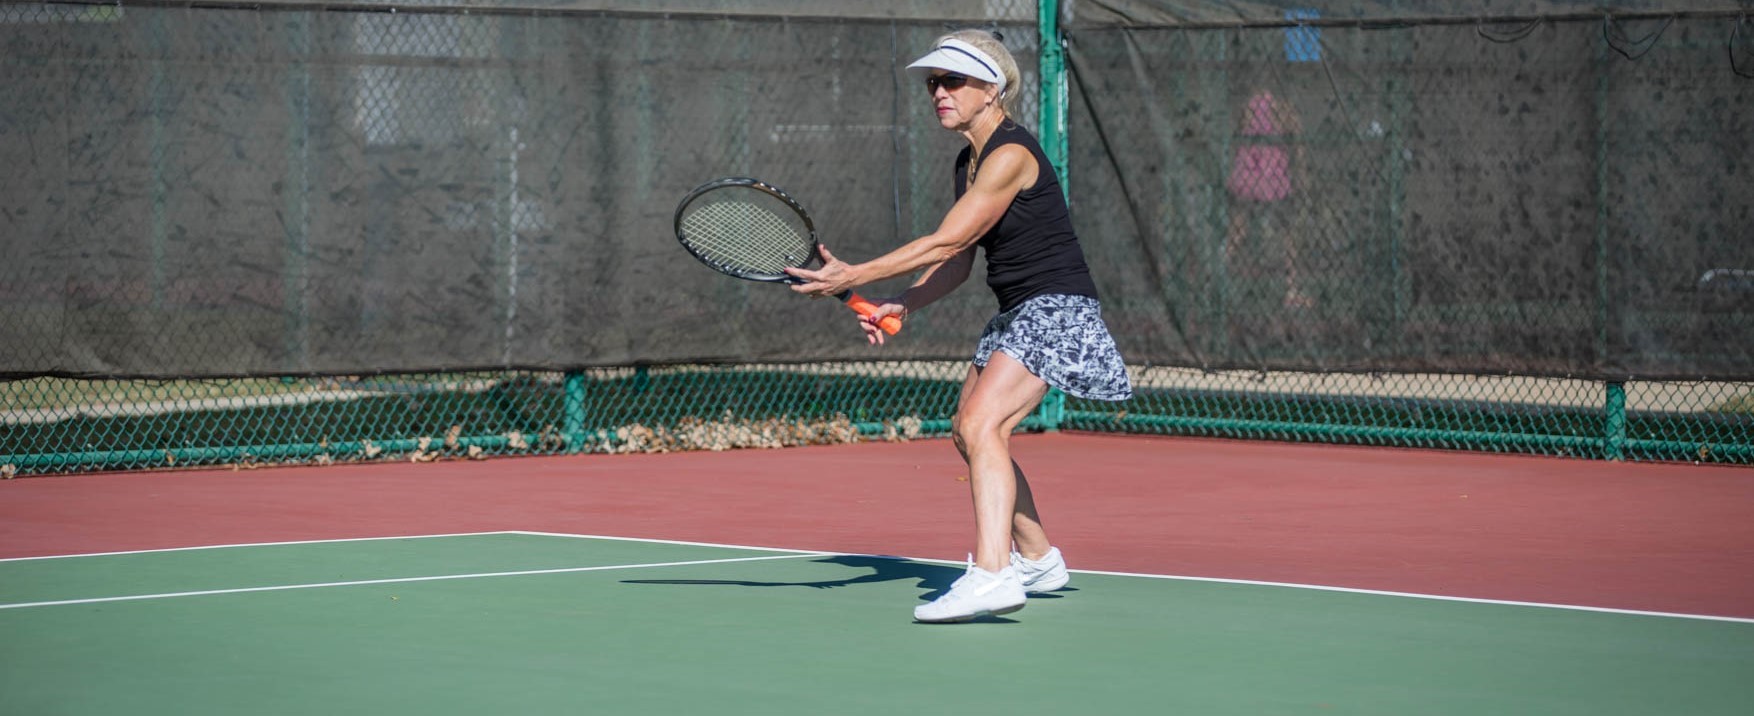 Ready to Hit the Tennis Court? Here are 3 Common (But Painful!) Injuries to Avoid